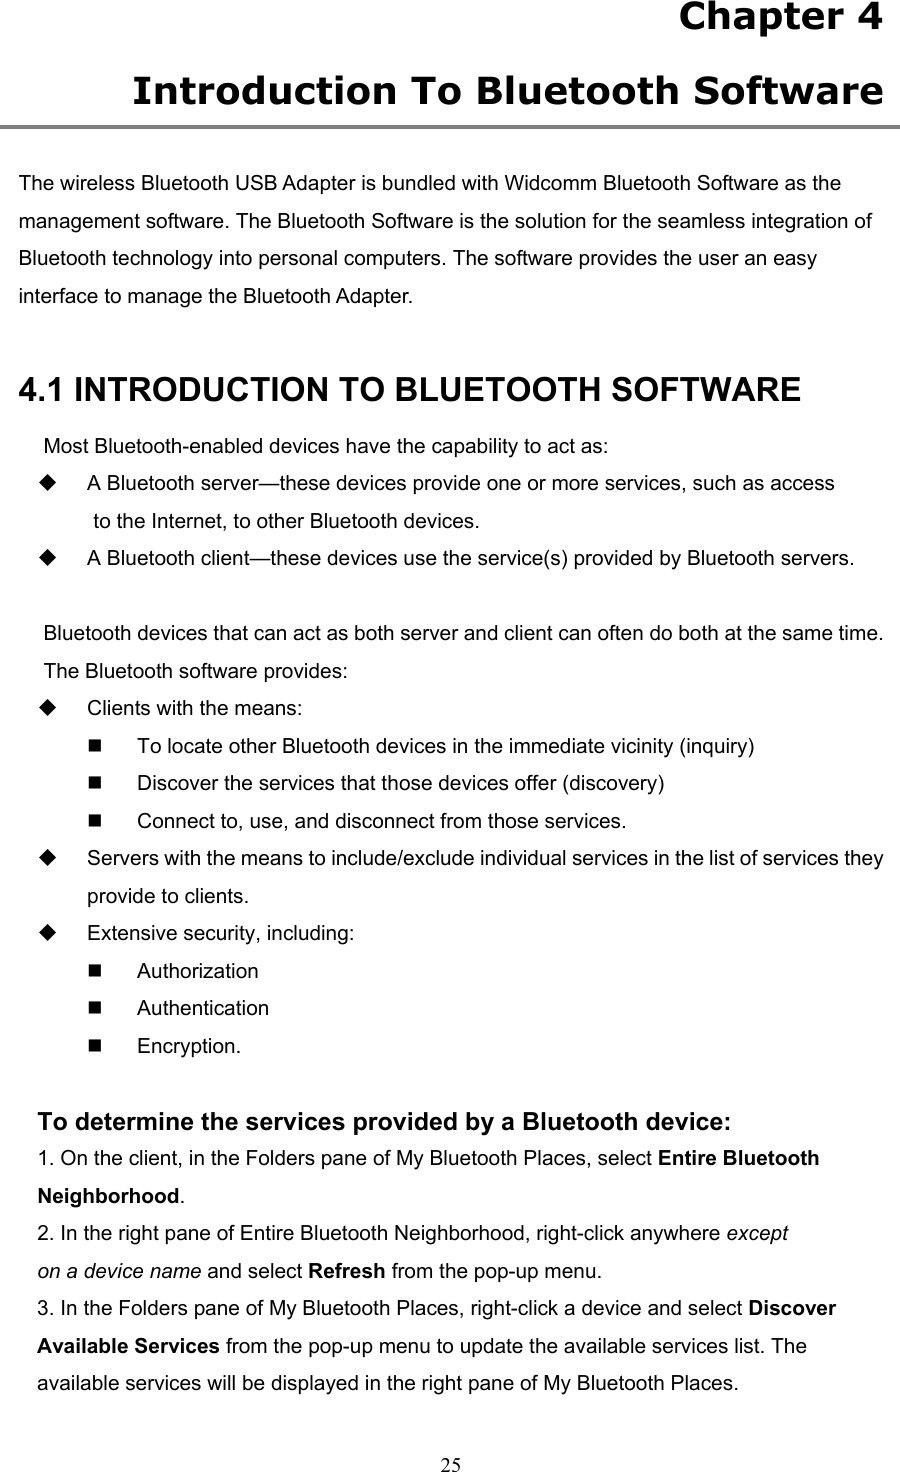  25 Chapter 4  Introduction To Bluetooth Software  The wireless Bluetooth USB Adapter is bundled with Widcomm Bluetooth Software as the management software. The Bluetooth Software is the solution for the seamless integration of Bluetooth technology into personal computers. The software provides the user an easy interface to manage the Bluetooth Adapter.    4.1 INTRODUCTION TO BLUETOOTH SOFTWARE Most Bluetooth-enabled devices have the capability to act as:   A Bluetooth server—these devices provide one or more services, such as access to the Internet, to other Bluetooth devices.   A Bluetooth client—these devices use the service(s) provided by Bluetooth servers.  Bluetooth devices that can act as both server and client can often do both at the same time. The Bluetooth software provides:   Clients with the means:   To locate other Bluetooth devices in the immediate vicinity (inquiry)   Discover the services that those devices offer (discovery)   Connect to, use, and disconnect from those services.   Servers with the means to include/exclude individual services in the list of services they provide to clients.   Extensive security, including:   Authorization   Authentication   Encryption.  To determine the services provided by a Bluetooth device: 1. On the client, in the Folders pane of My Bluetooth Places, select Entire Bluetooth Neighborhood. 2. In the right pane of Entire Bluetooth Neighborhood, right-click anywhere except on a device name and select Refresh from the pop-up menu. 3. In the Folders pane of My Bluetooth Places, right-click a device and select Discover Available Services from the pop-up menu to update the available services list. The available services will be displayed in the right pane of My Bluetooth Places. 